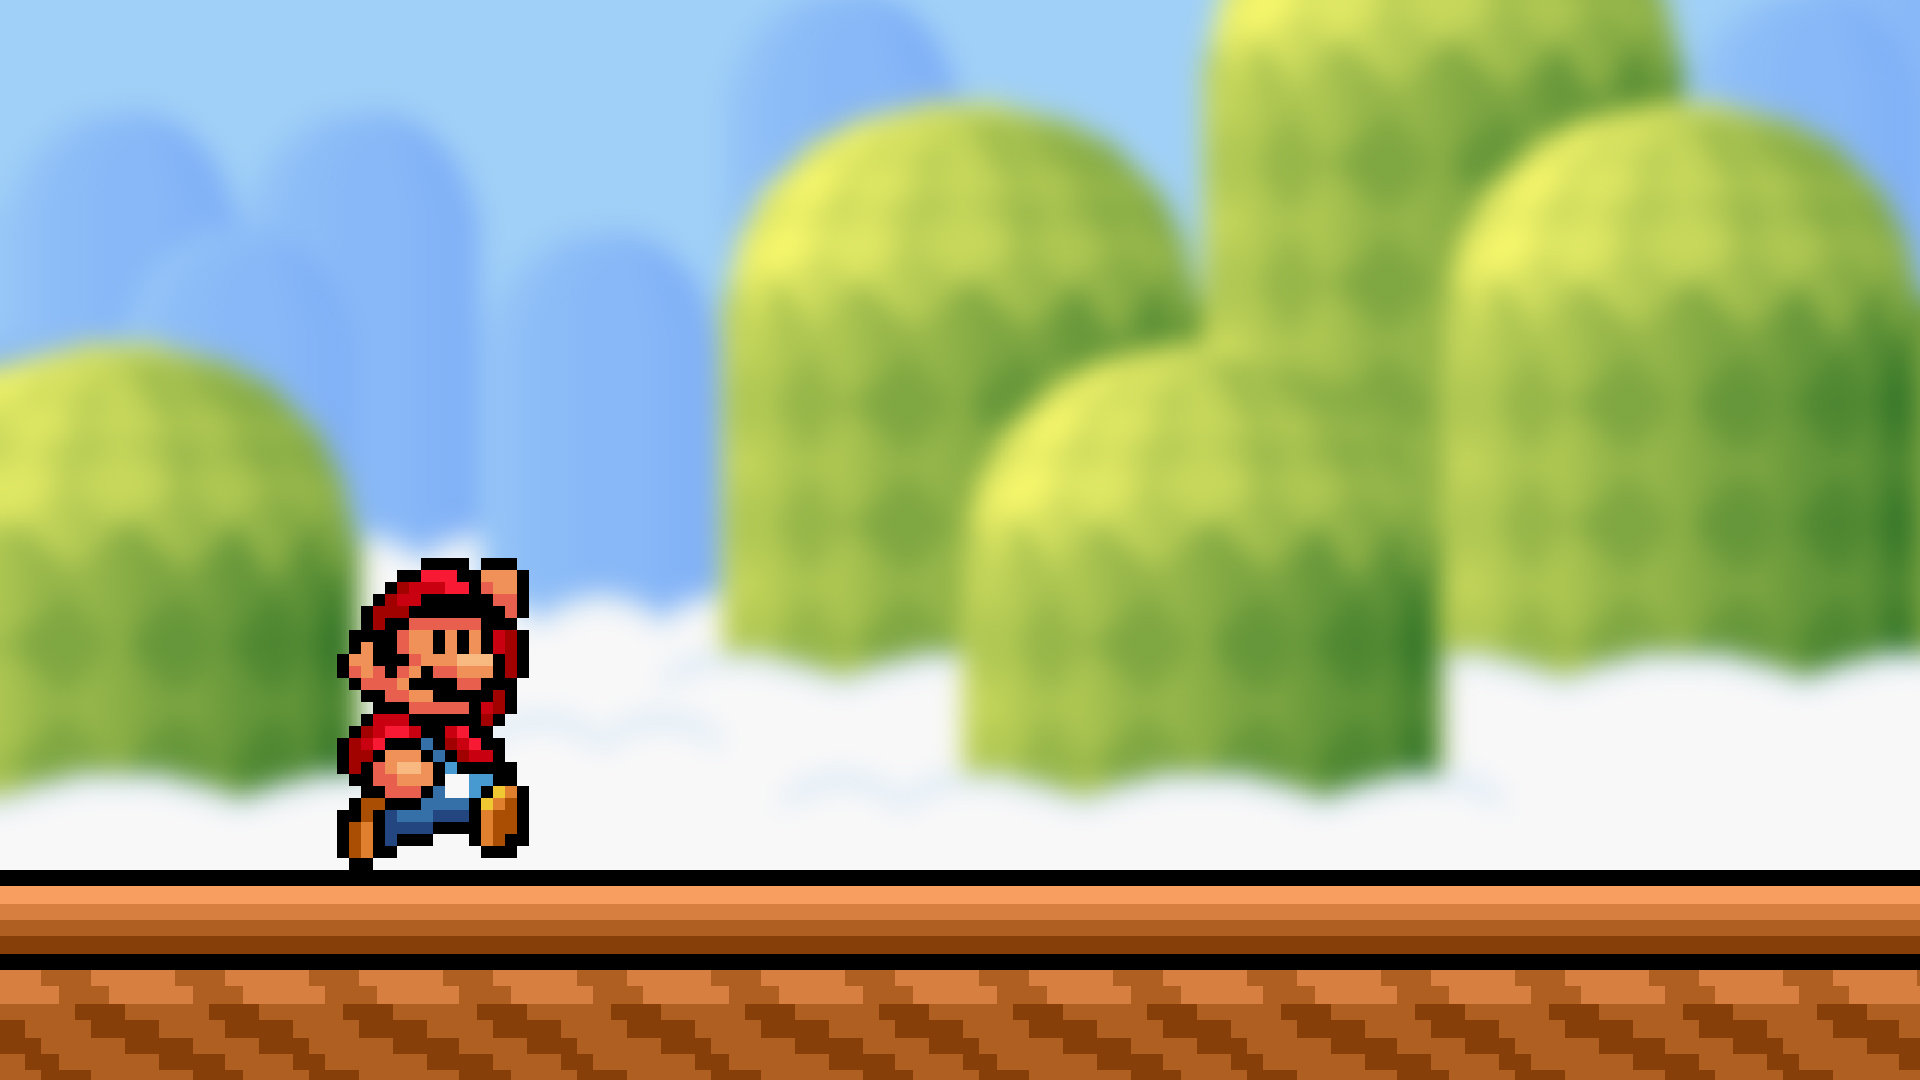 Download full hd 1920x1080 Super Mario Bros. desktop background ID:357590 for free